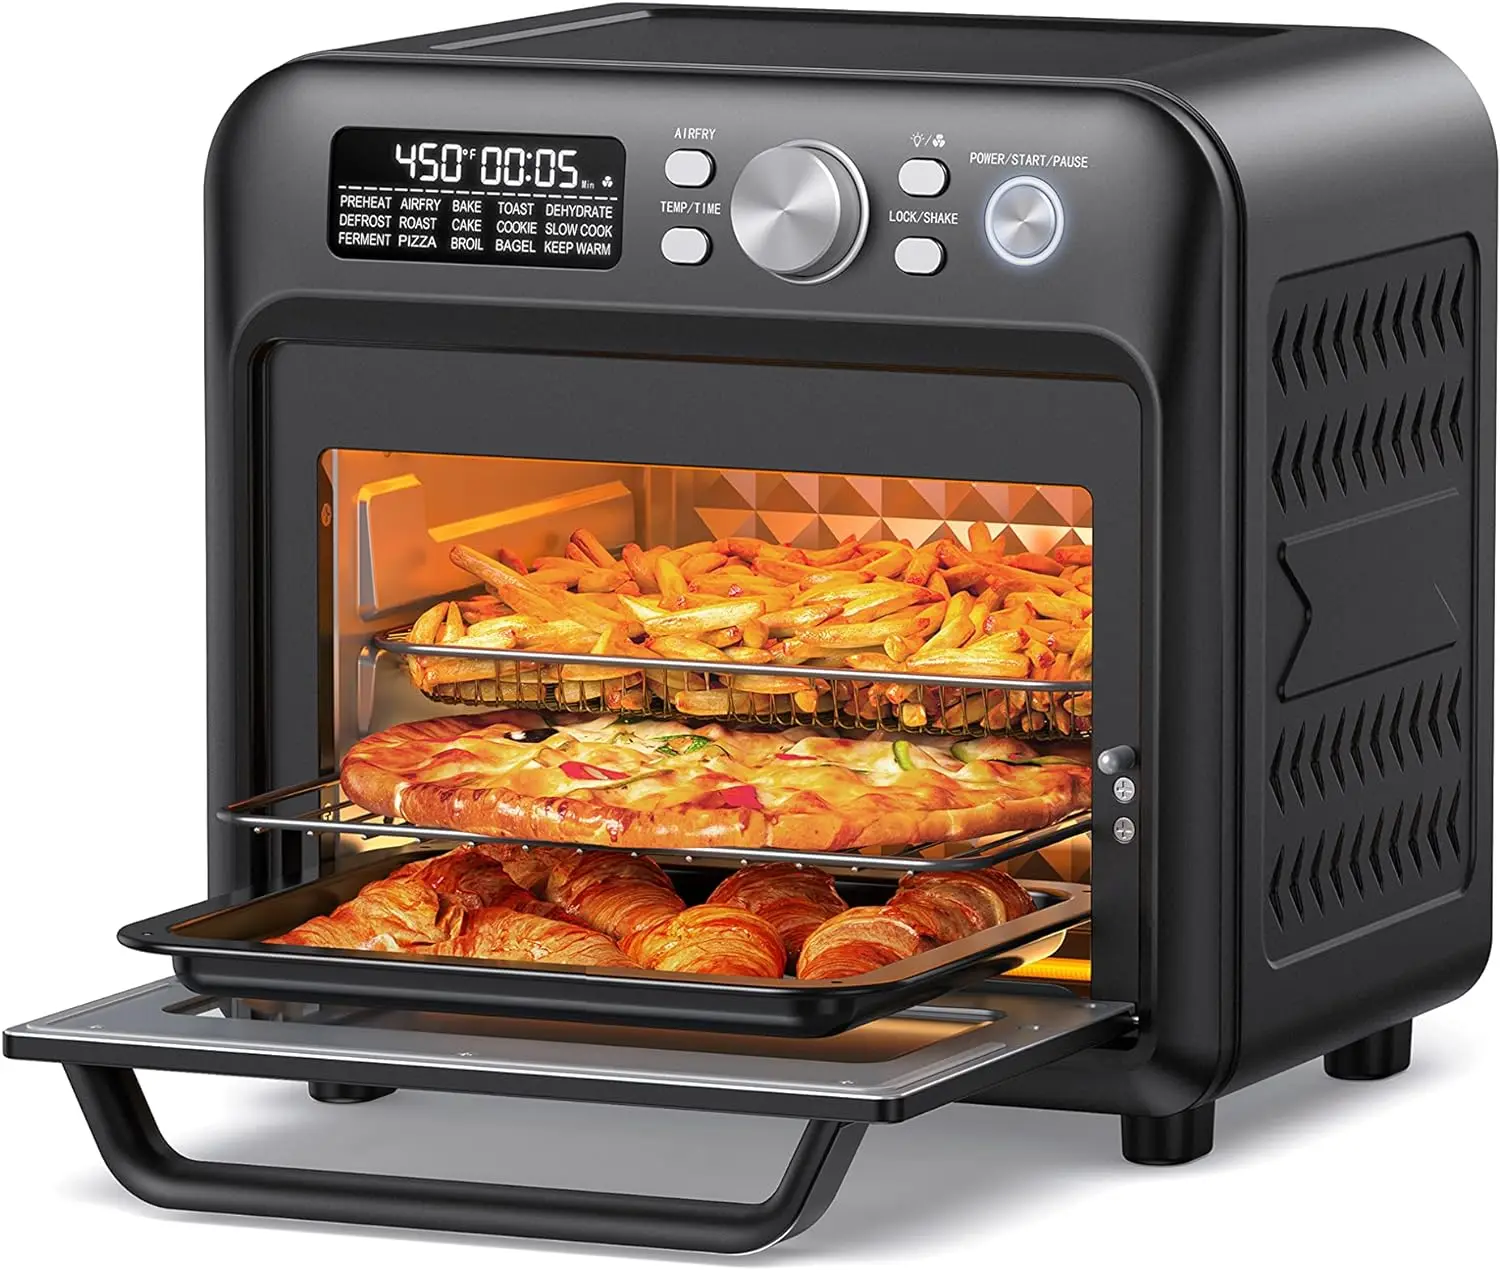 

RHÔNE Air Fryer Oven 19QT, Family-Sized Toaster Oven, Convection Oven with Child Lock, Fits 12-inch Pizza, 6-Slice Toast, Butto